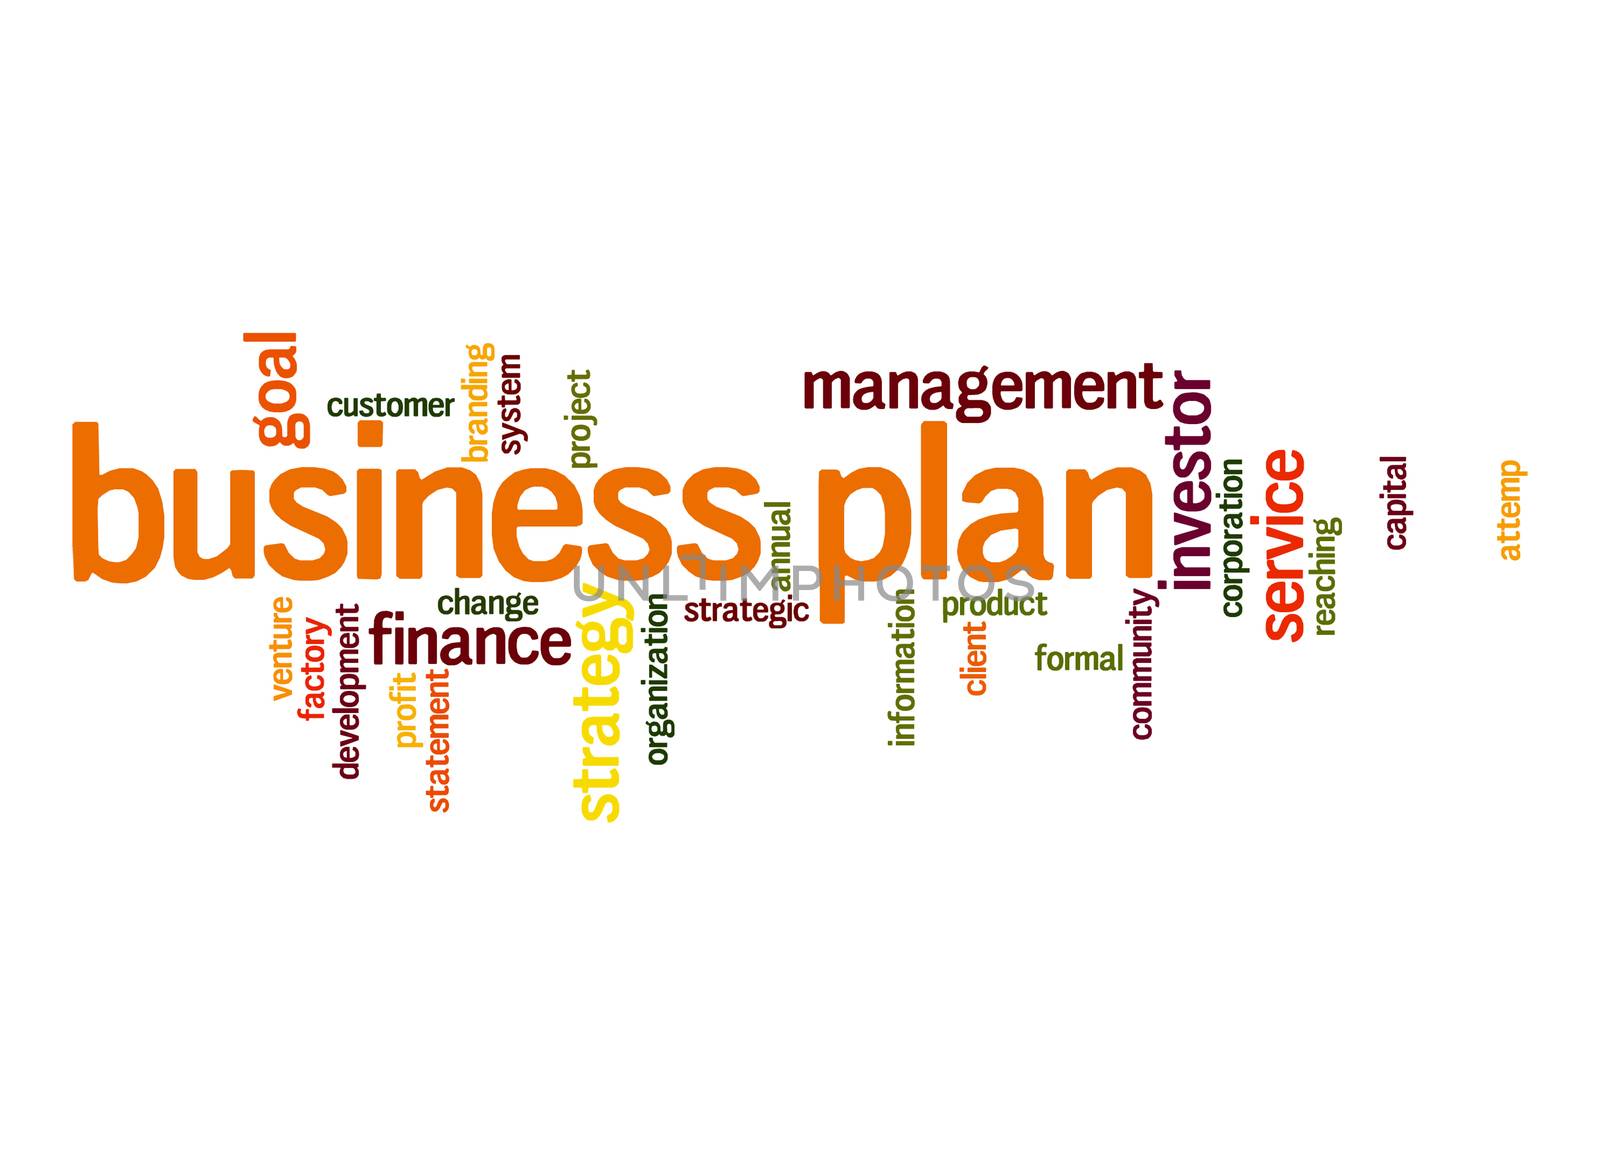 Business plan word cloud by tang90246